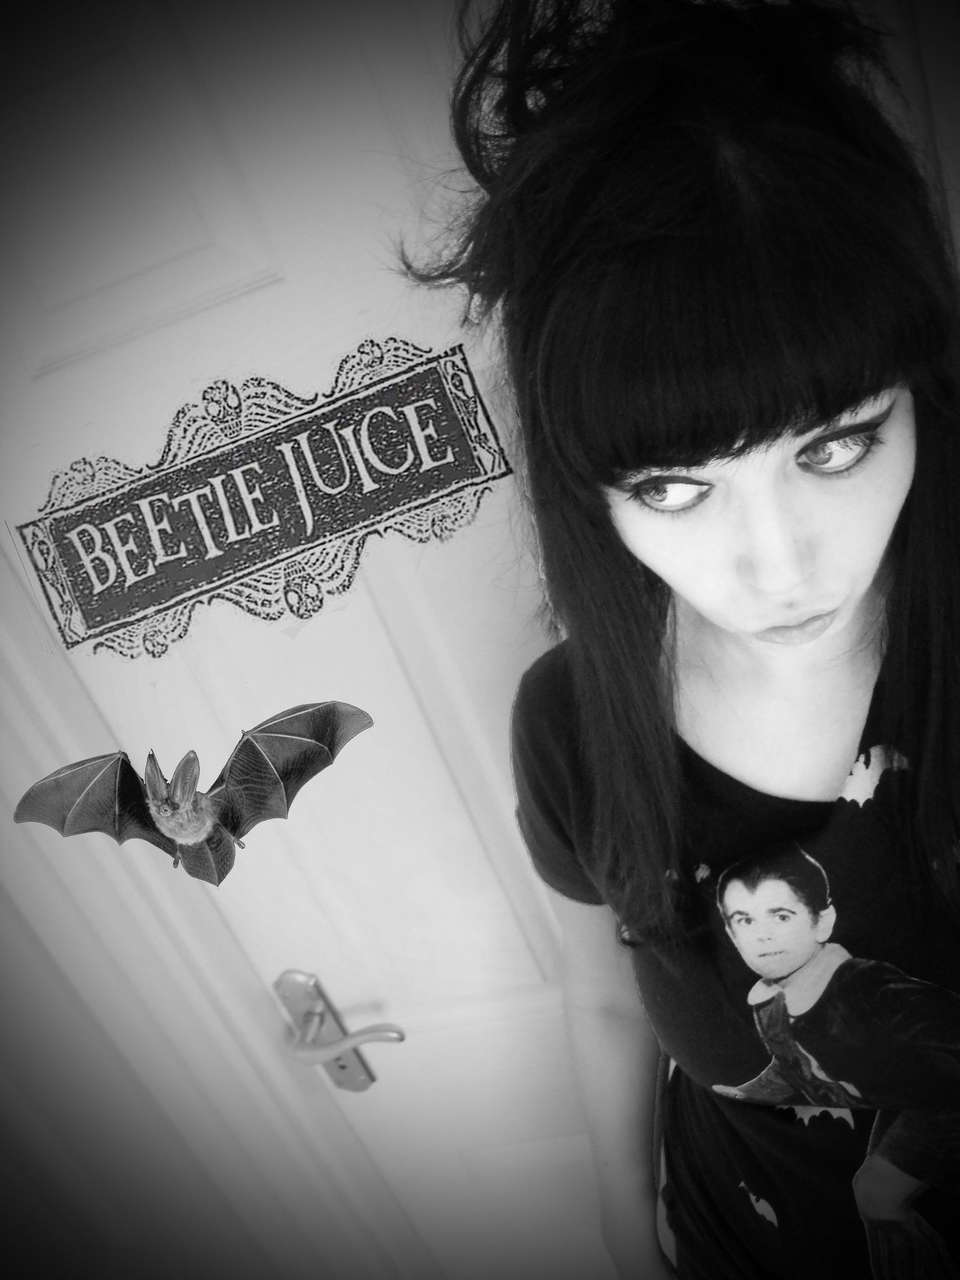 Lydia From Beetlejuice Cosplay I Did A While Bac